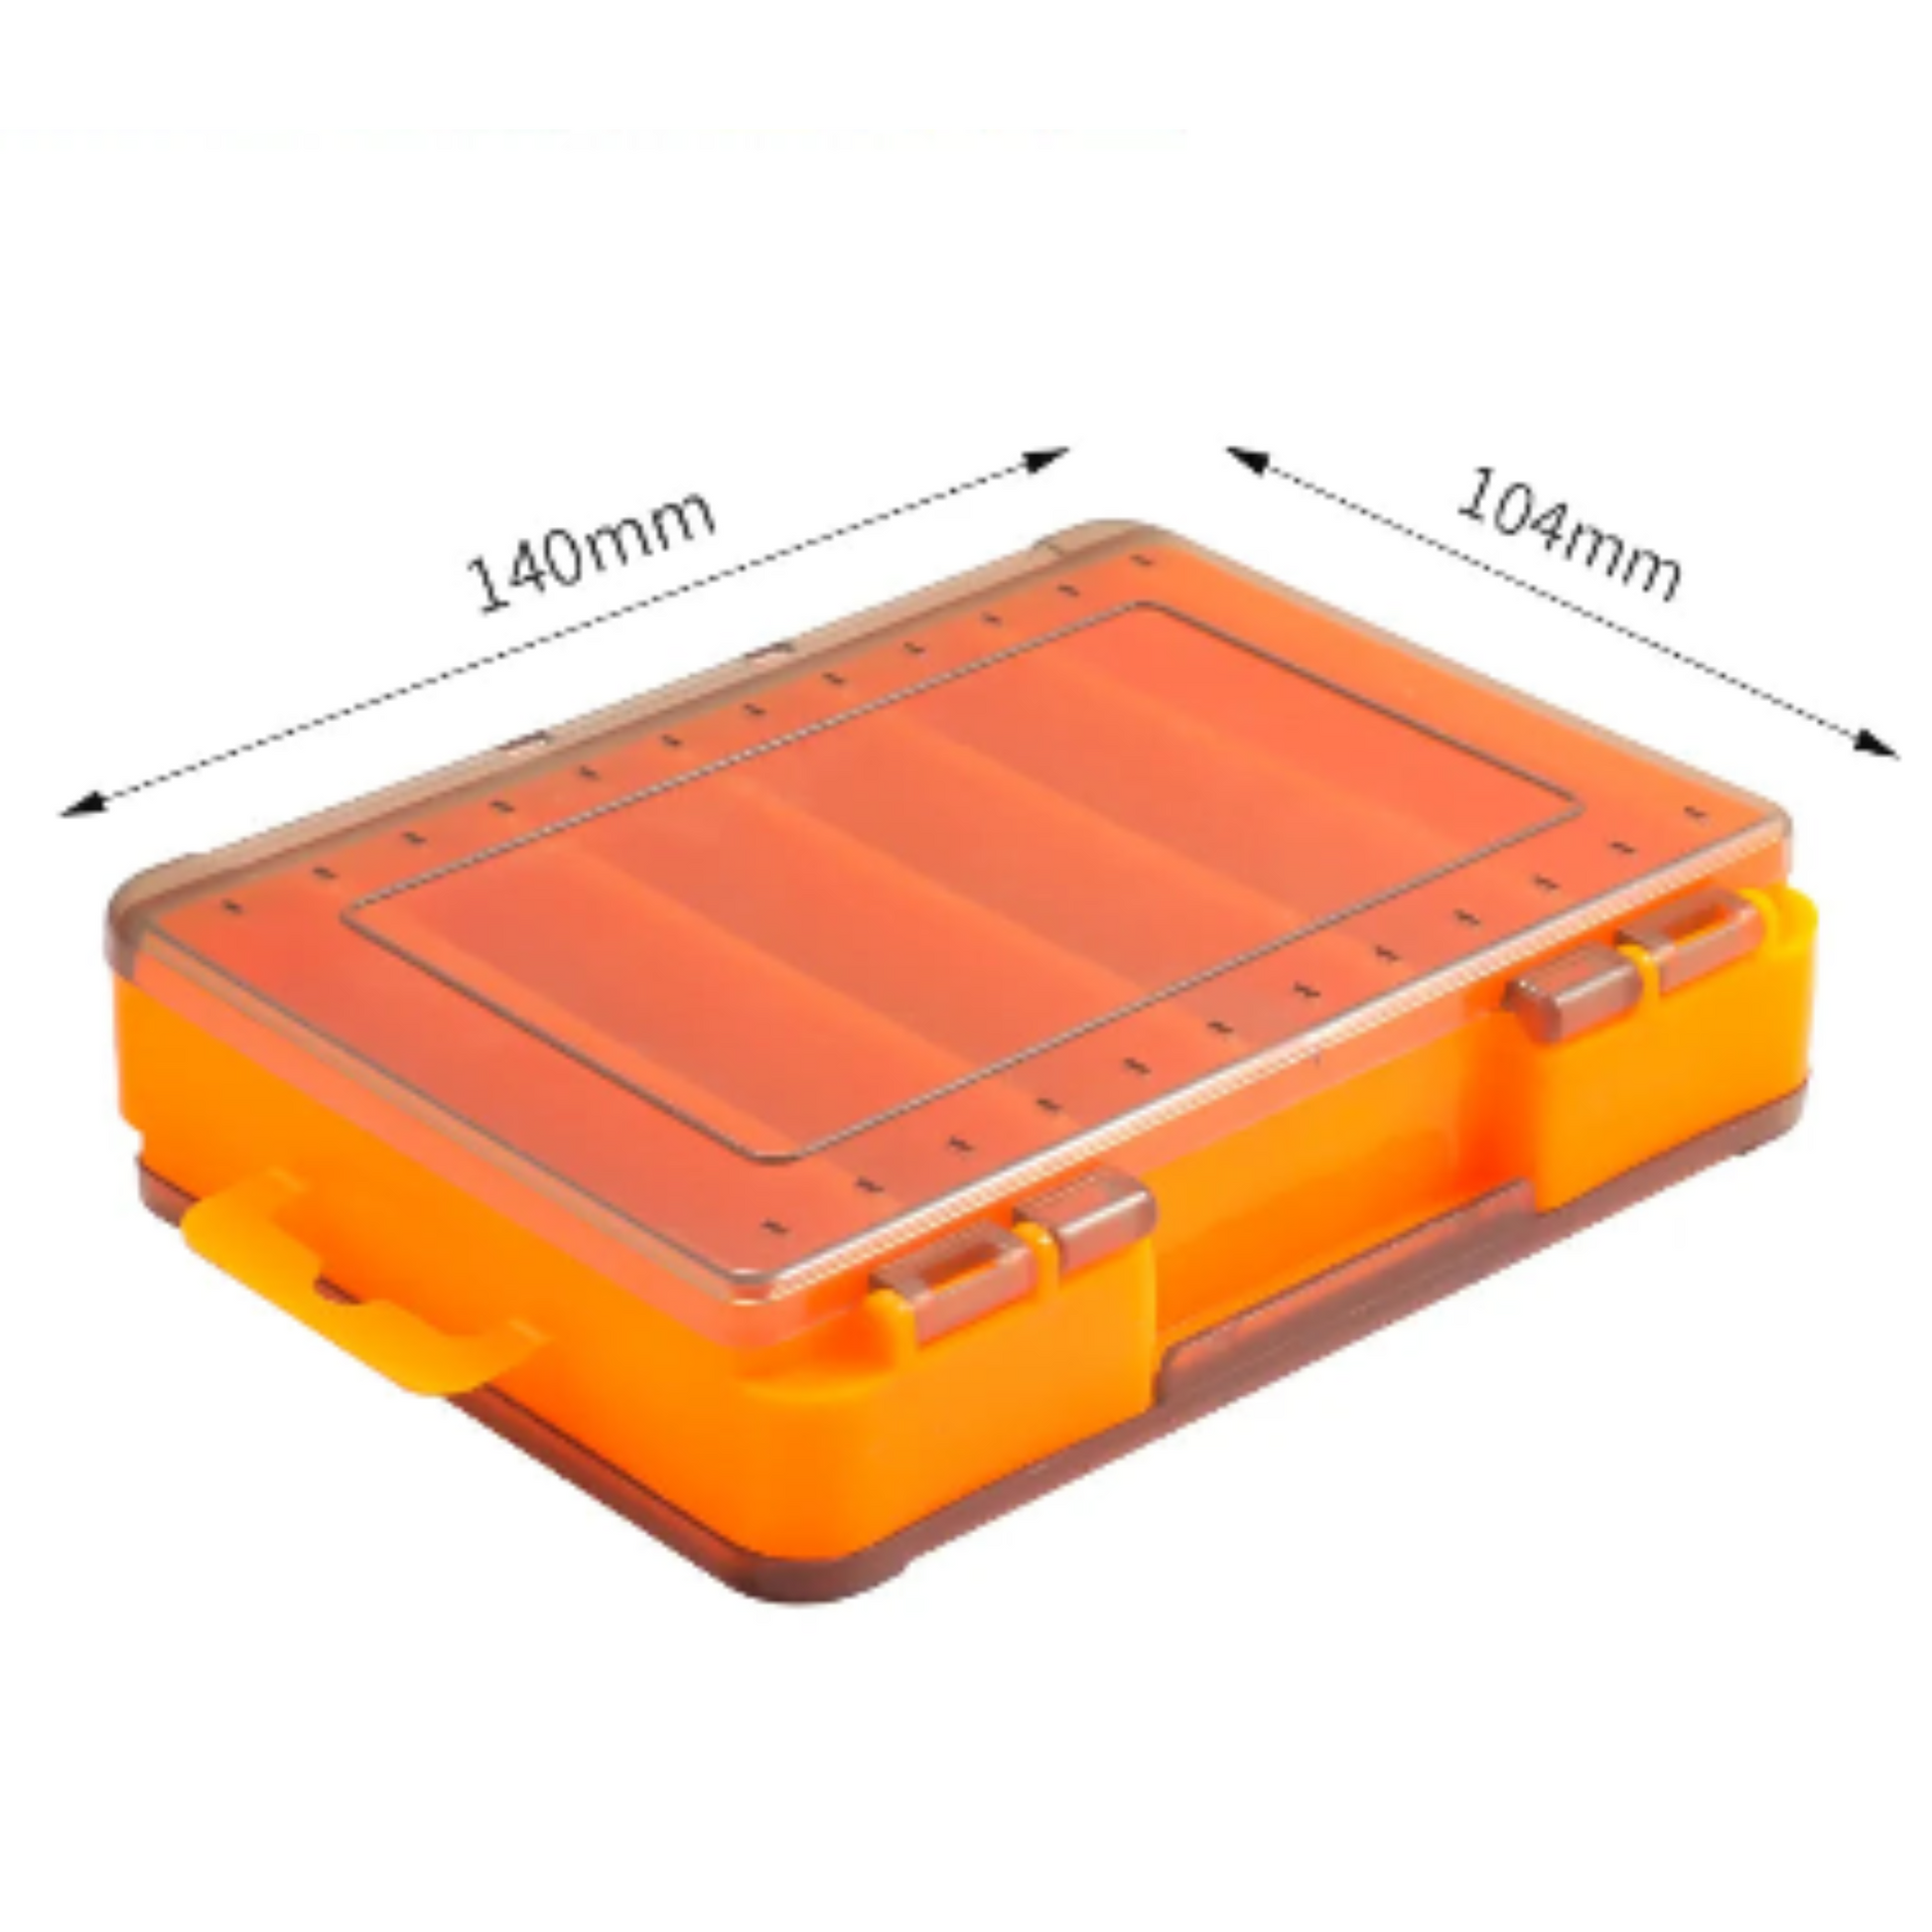 Gobait Fishing Box - 140mm x 104mm - 12 Compartments - Orange – ePesca